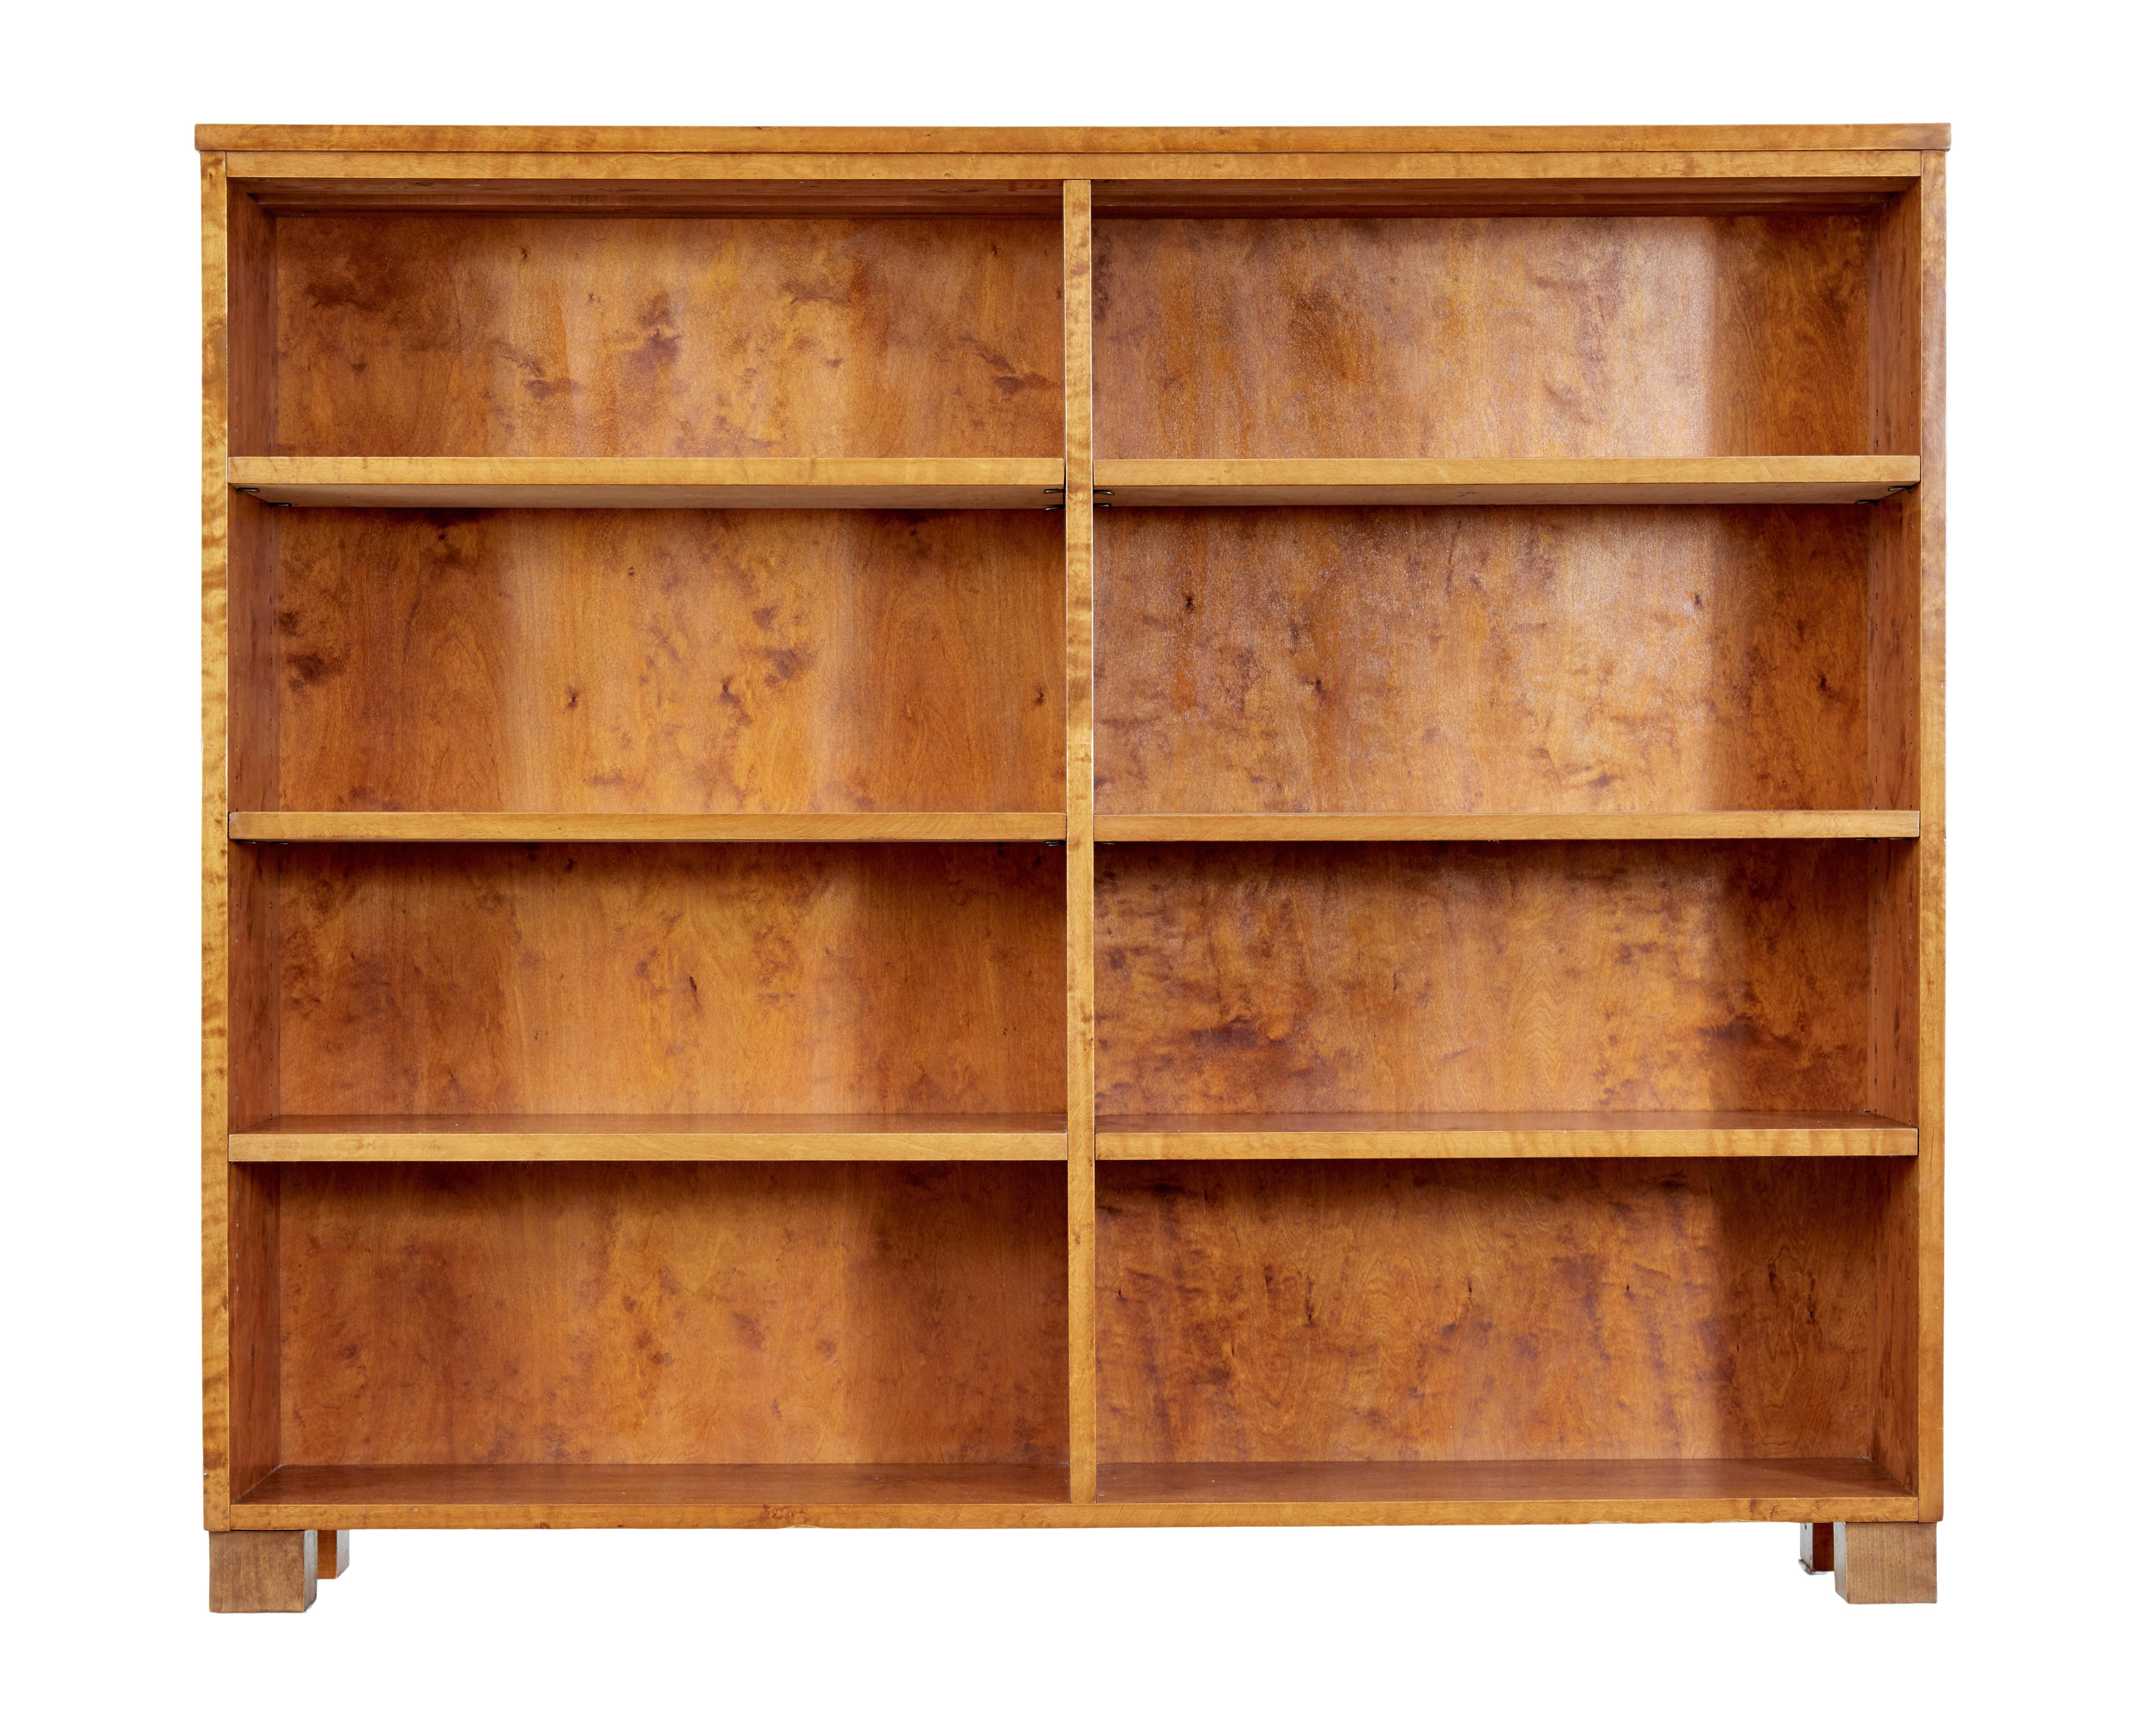 Mid 20th century birch tall open bookcase circa 1950.

Swedish tall open bookcase, made in a golden birch. Featuring 3 adjustable shelves either side of a central partition.

Standing on block feet. Recently re-finished in our workshop.